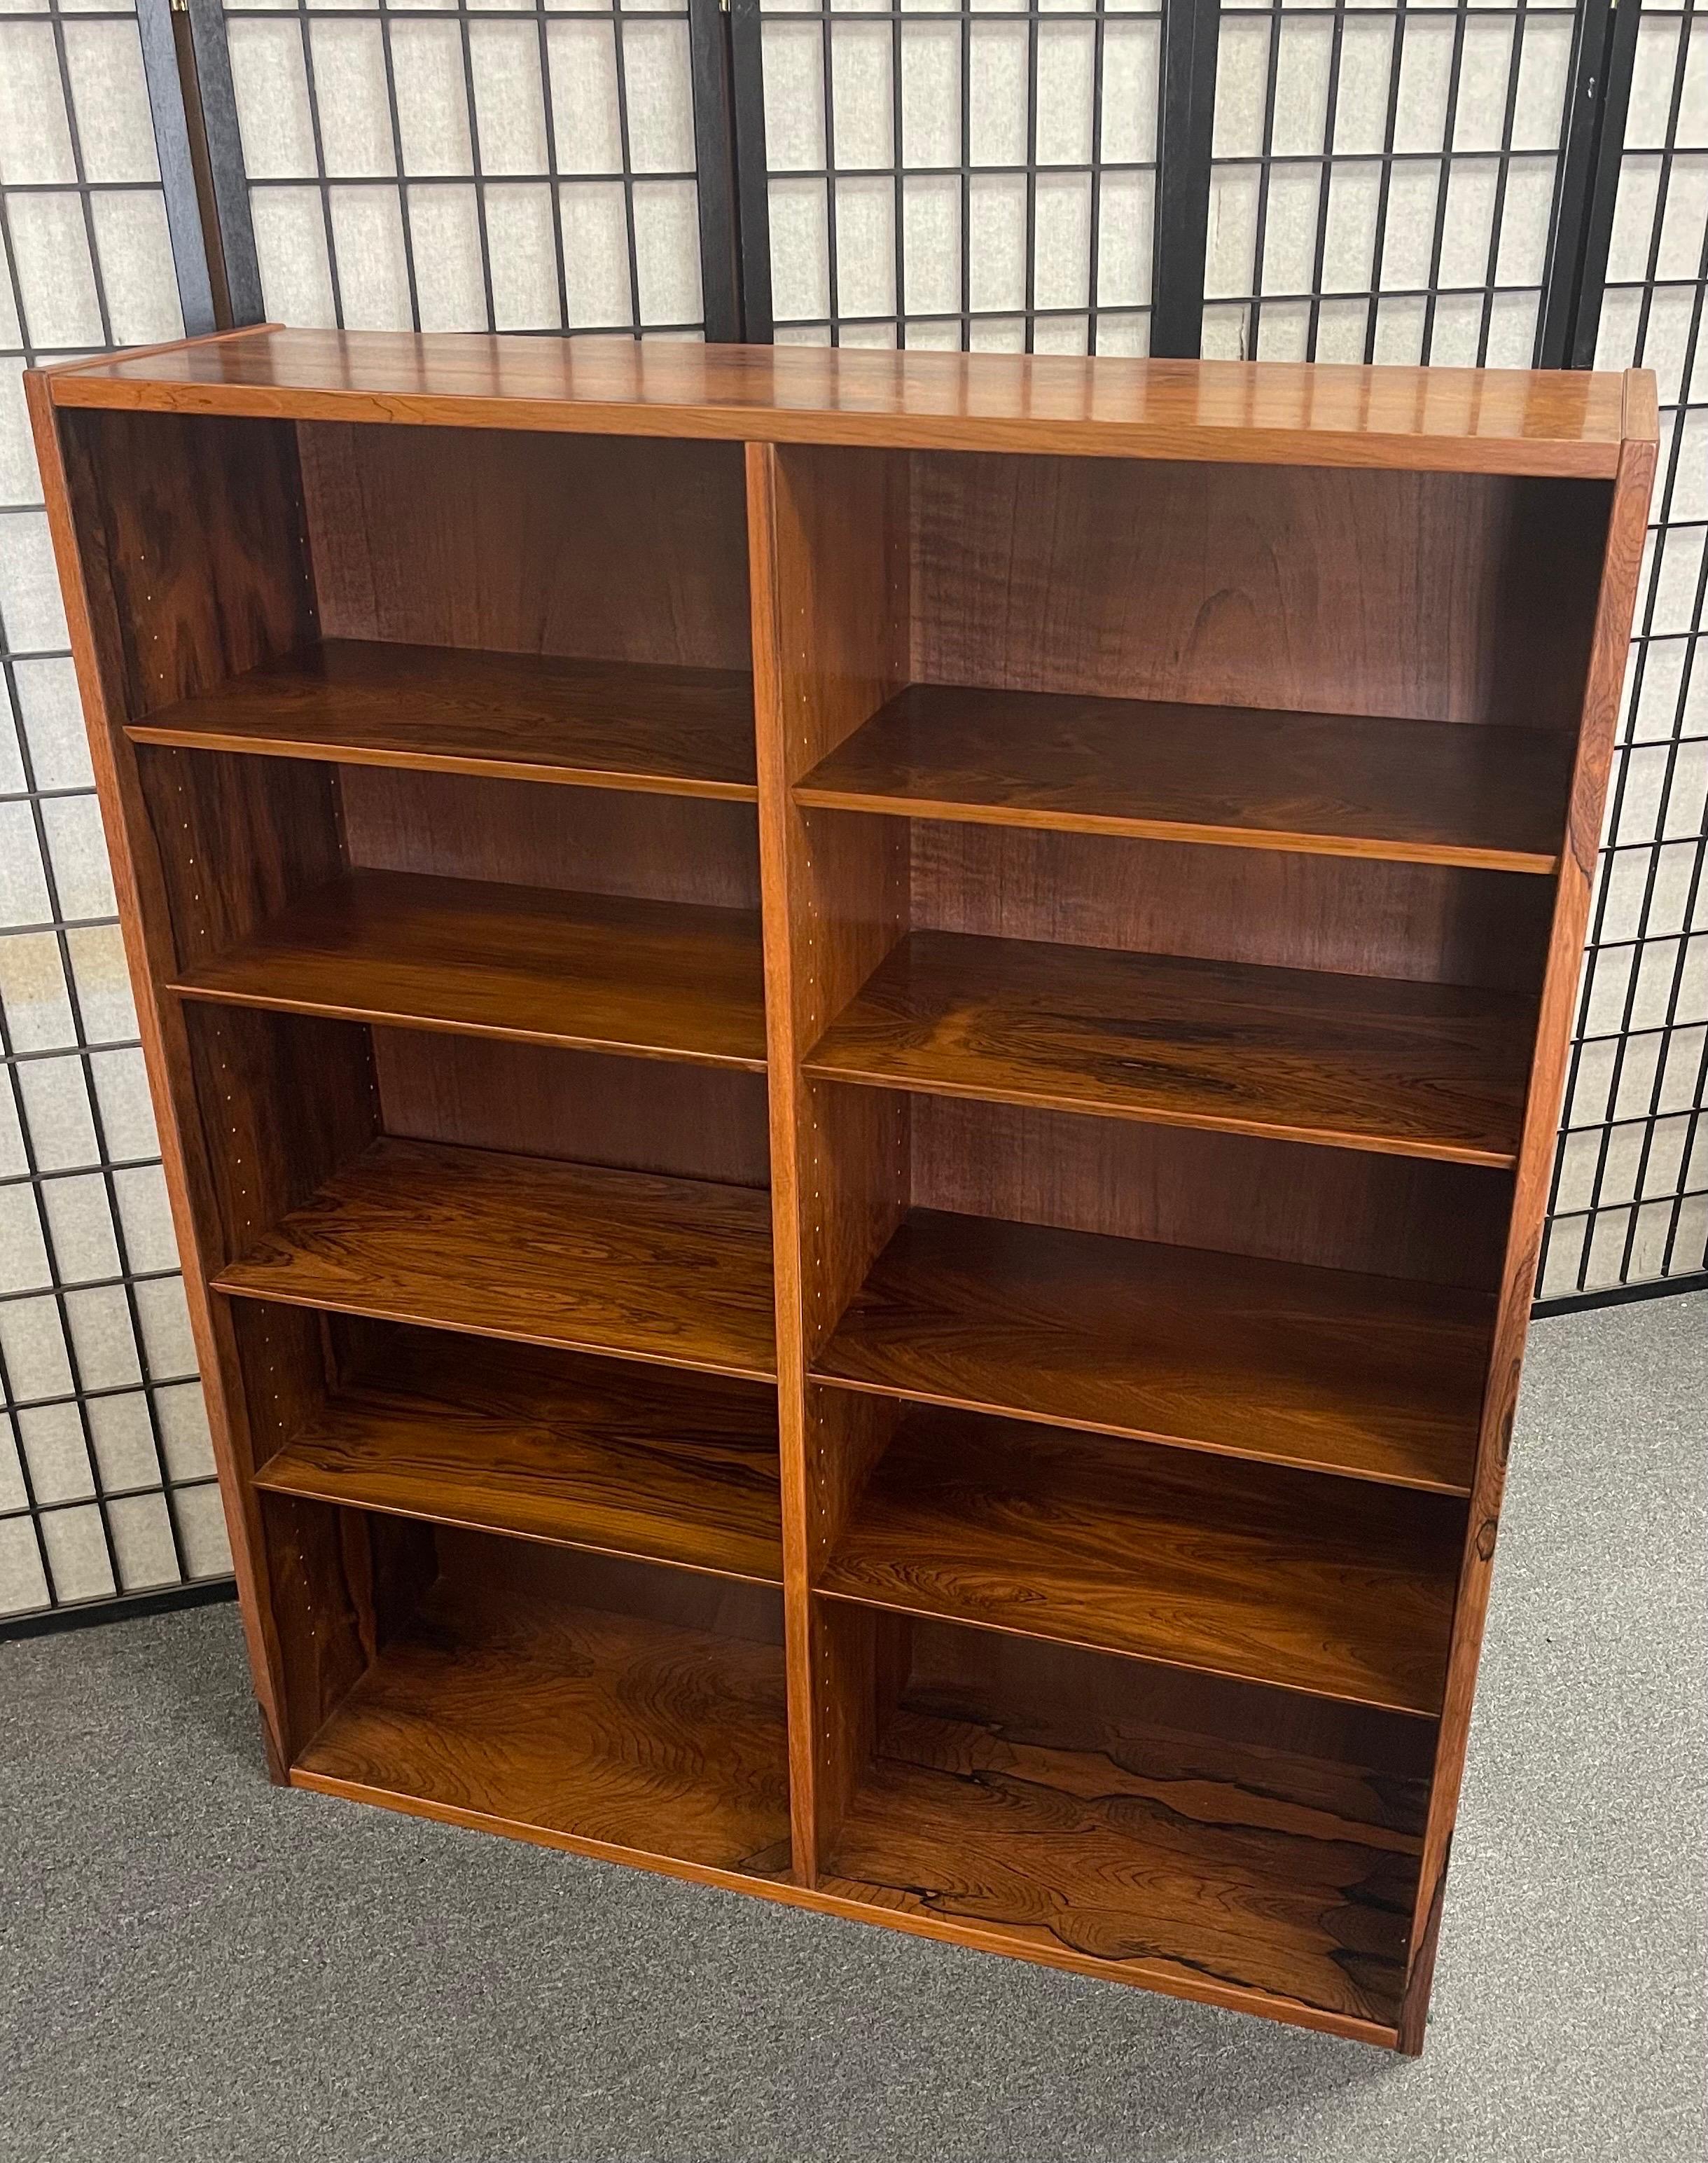 Beautiful and elegant Danish modern ten shelf rosewood bookcase in the style of Poul Hundevad, circa 1960's. The bookcase is in very good vintage condition, has a gorgeous rosewood grain and beveled edged adjustable shelves. The piece measures